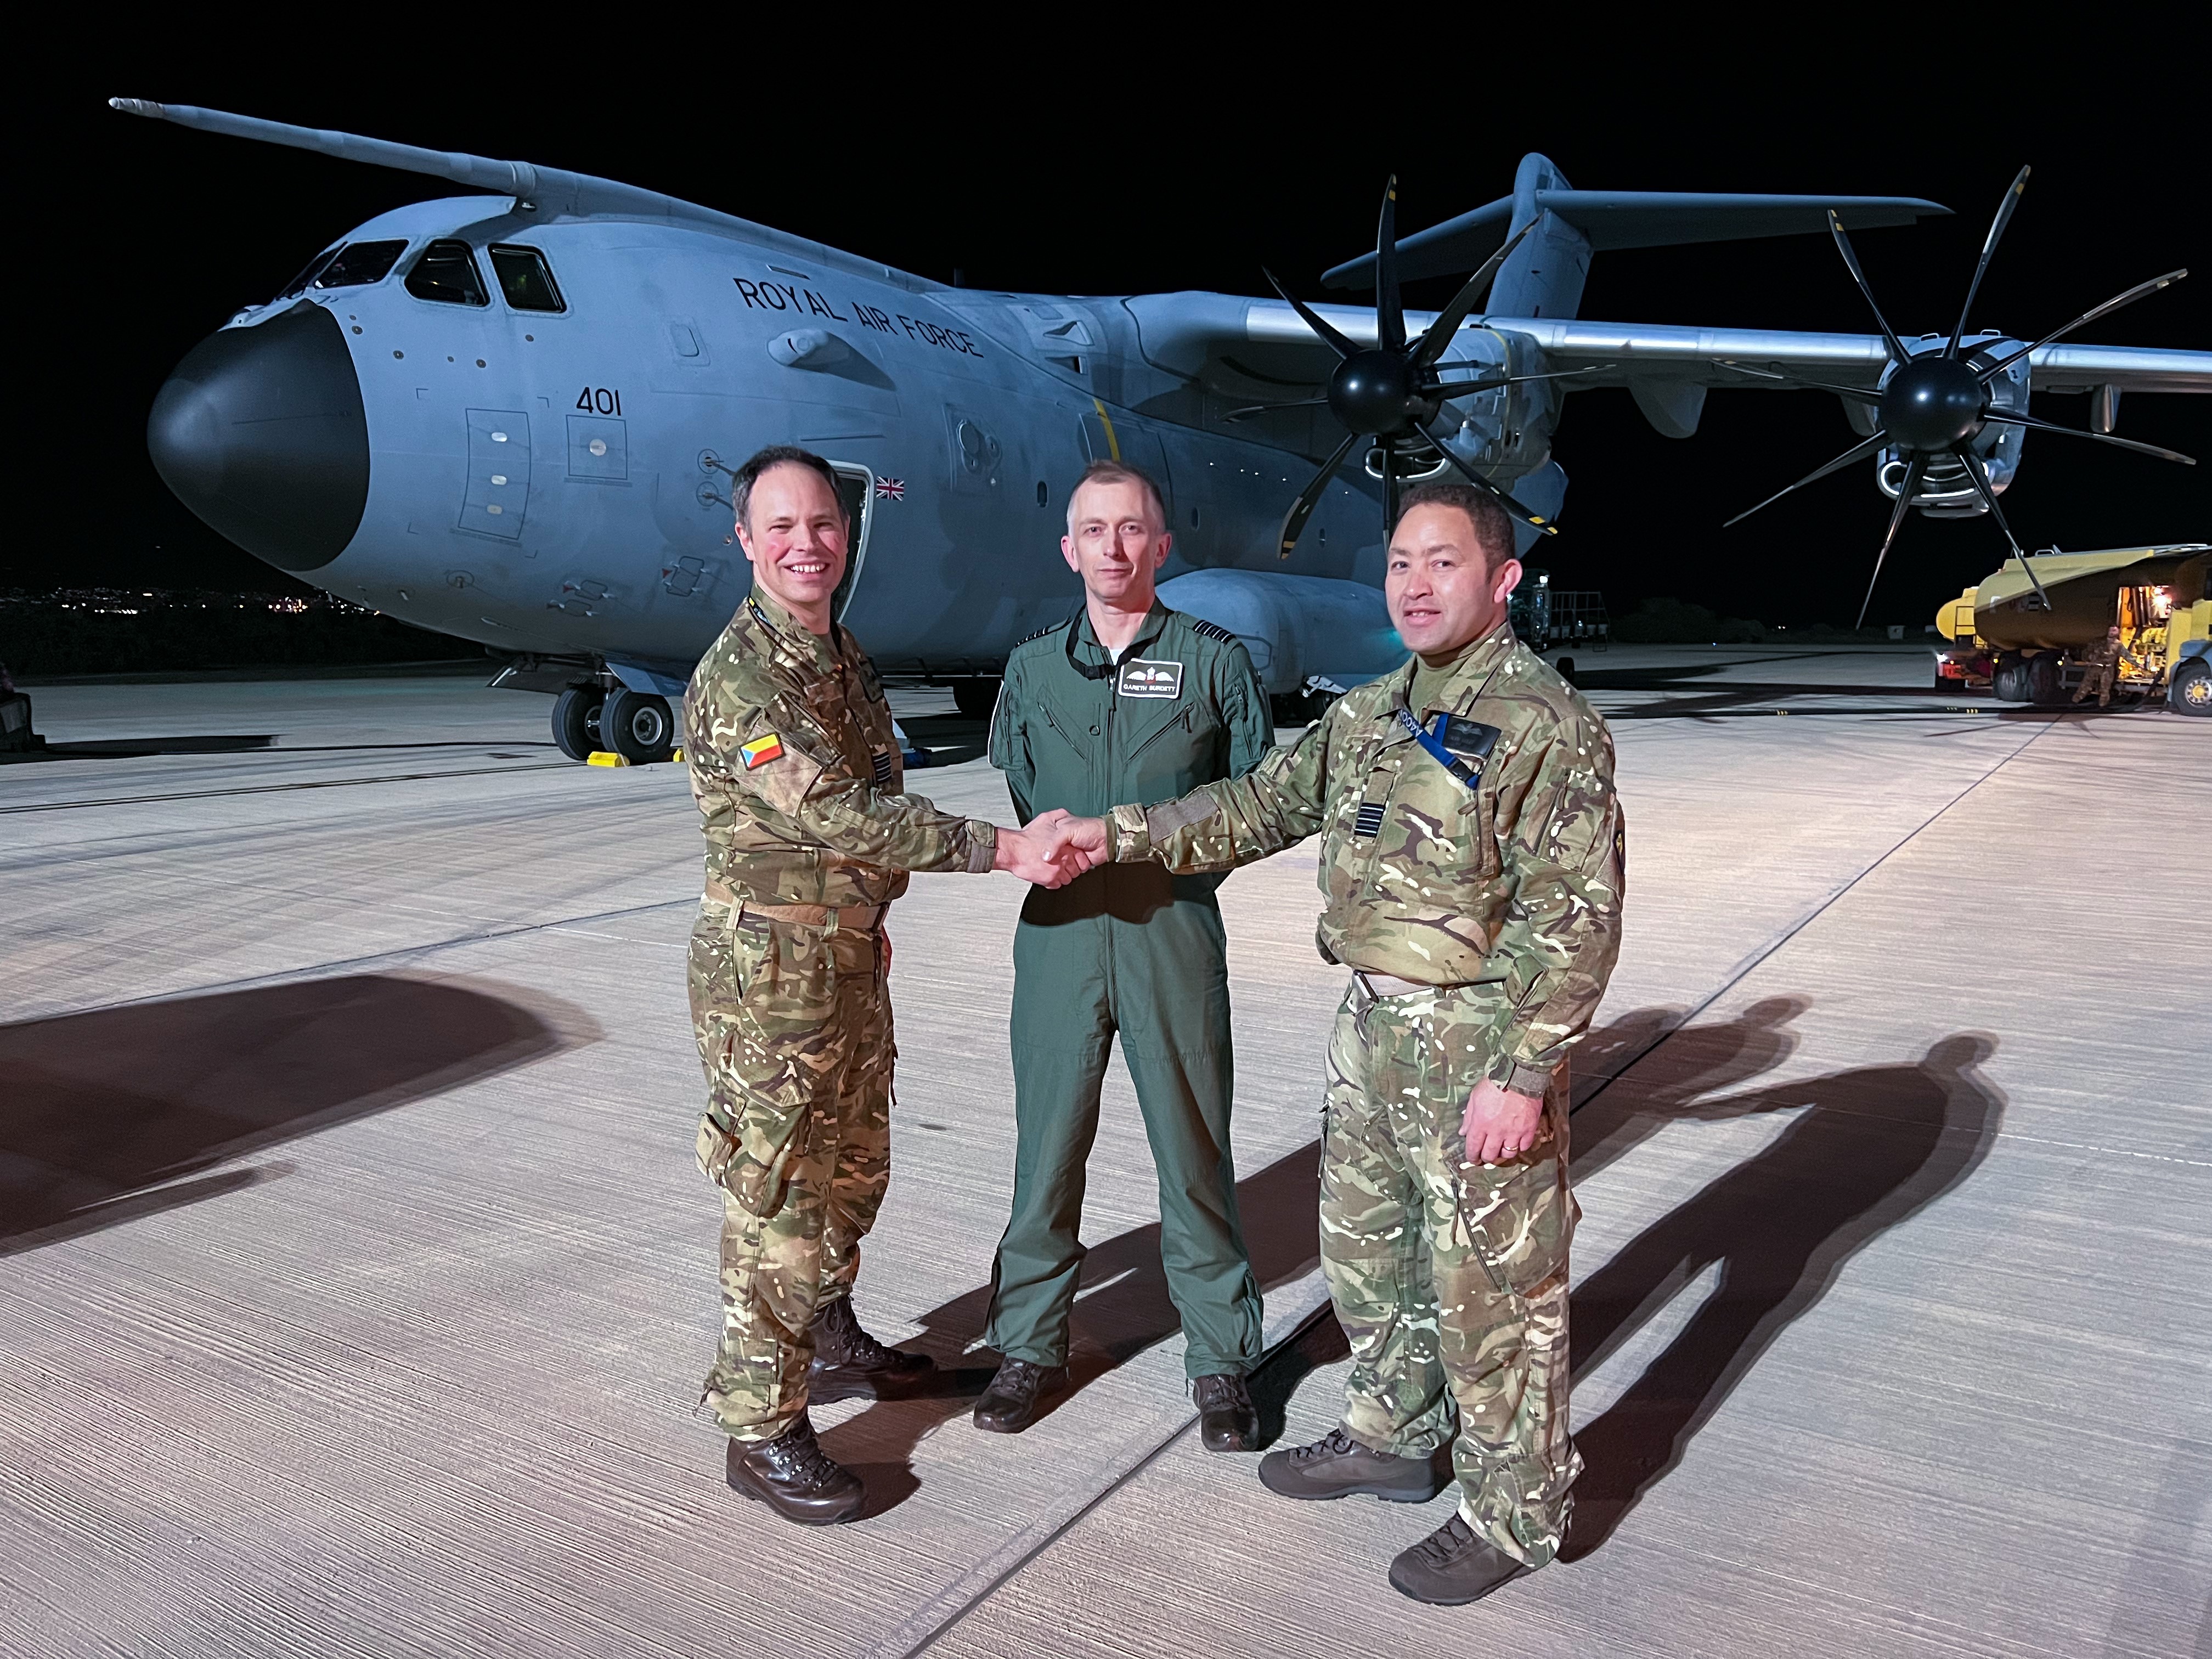 Image shows three RAF aviators shaking hands in by a RAF Hercules aircraft, on the airfield at night.